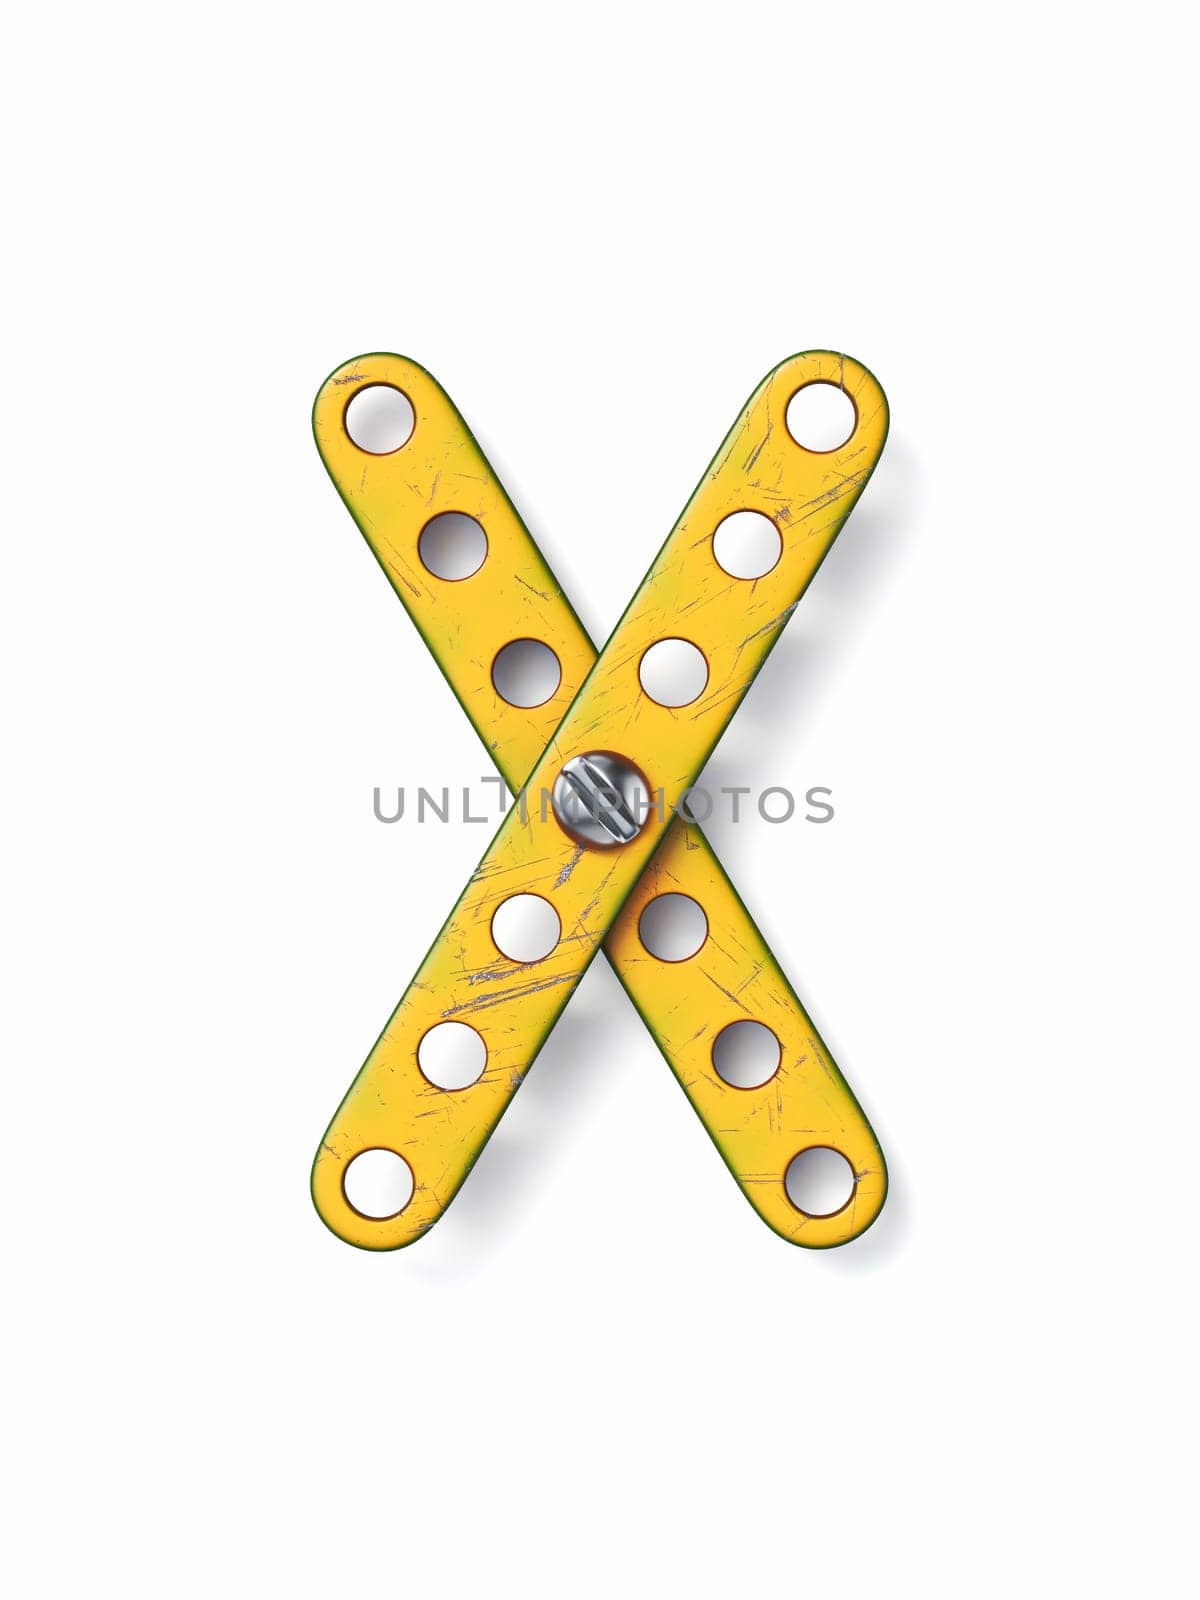 Aged yellow constructor font Letter X 3D rendering illustration isolated on white background